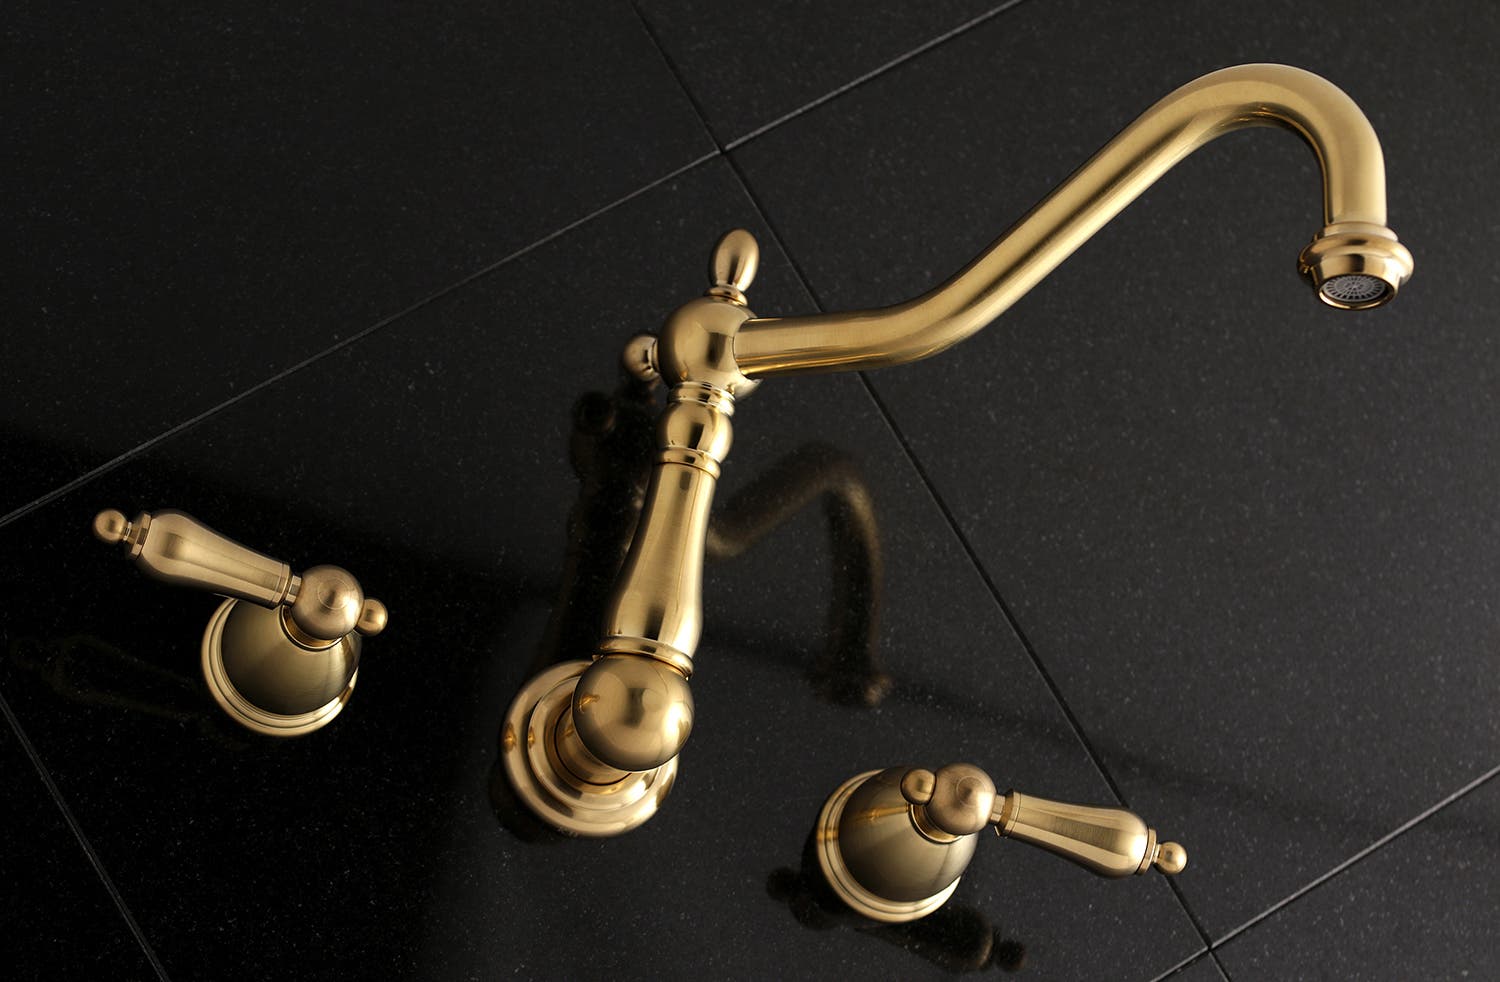 The Satin Brass Finish Stands on its own with the KS1027AL Roman Tub Filler